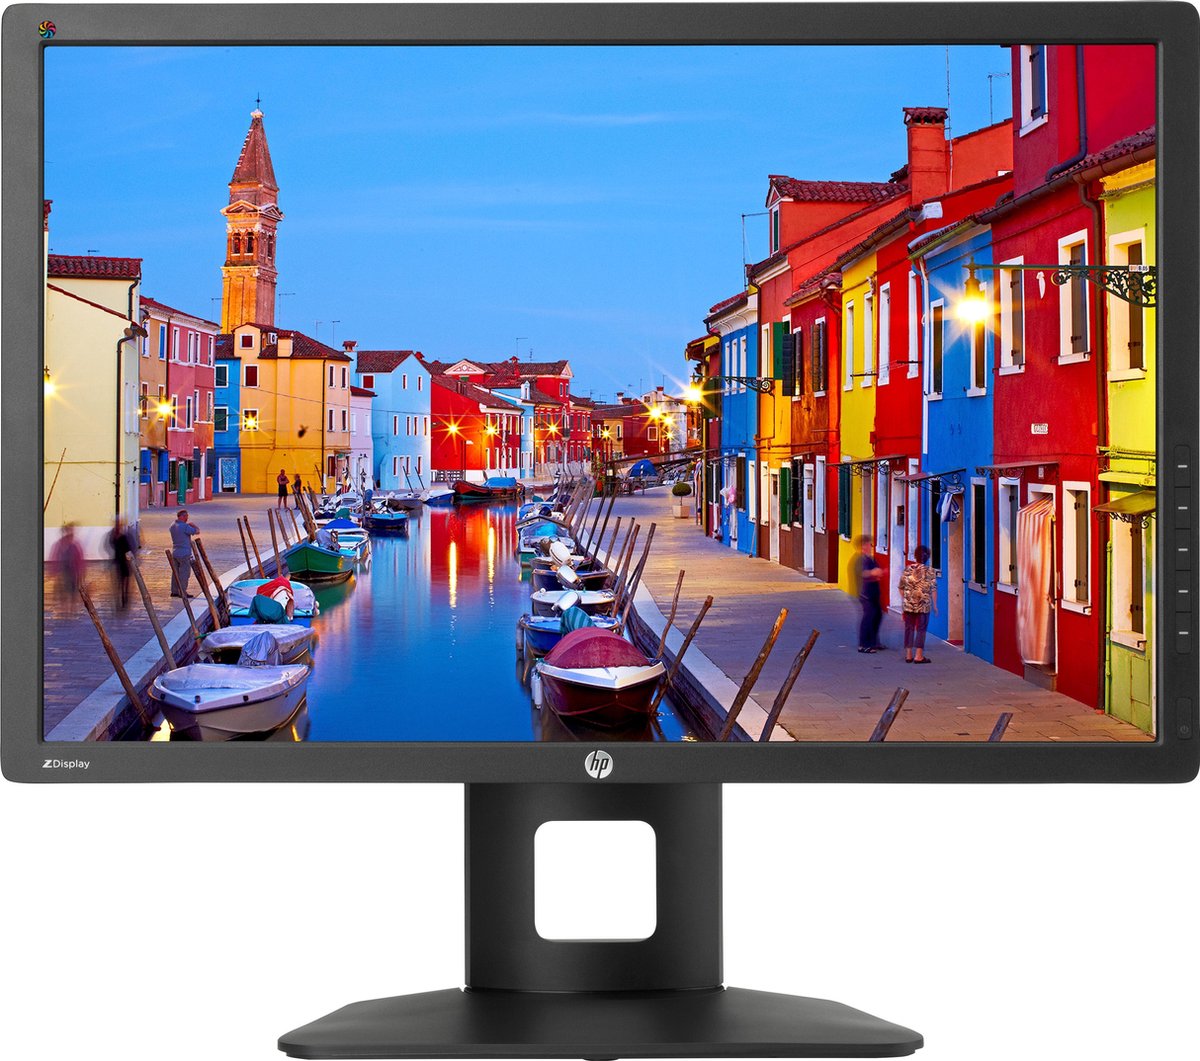 HP DreamColor Z24x G2 04381362